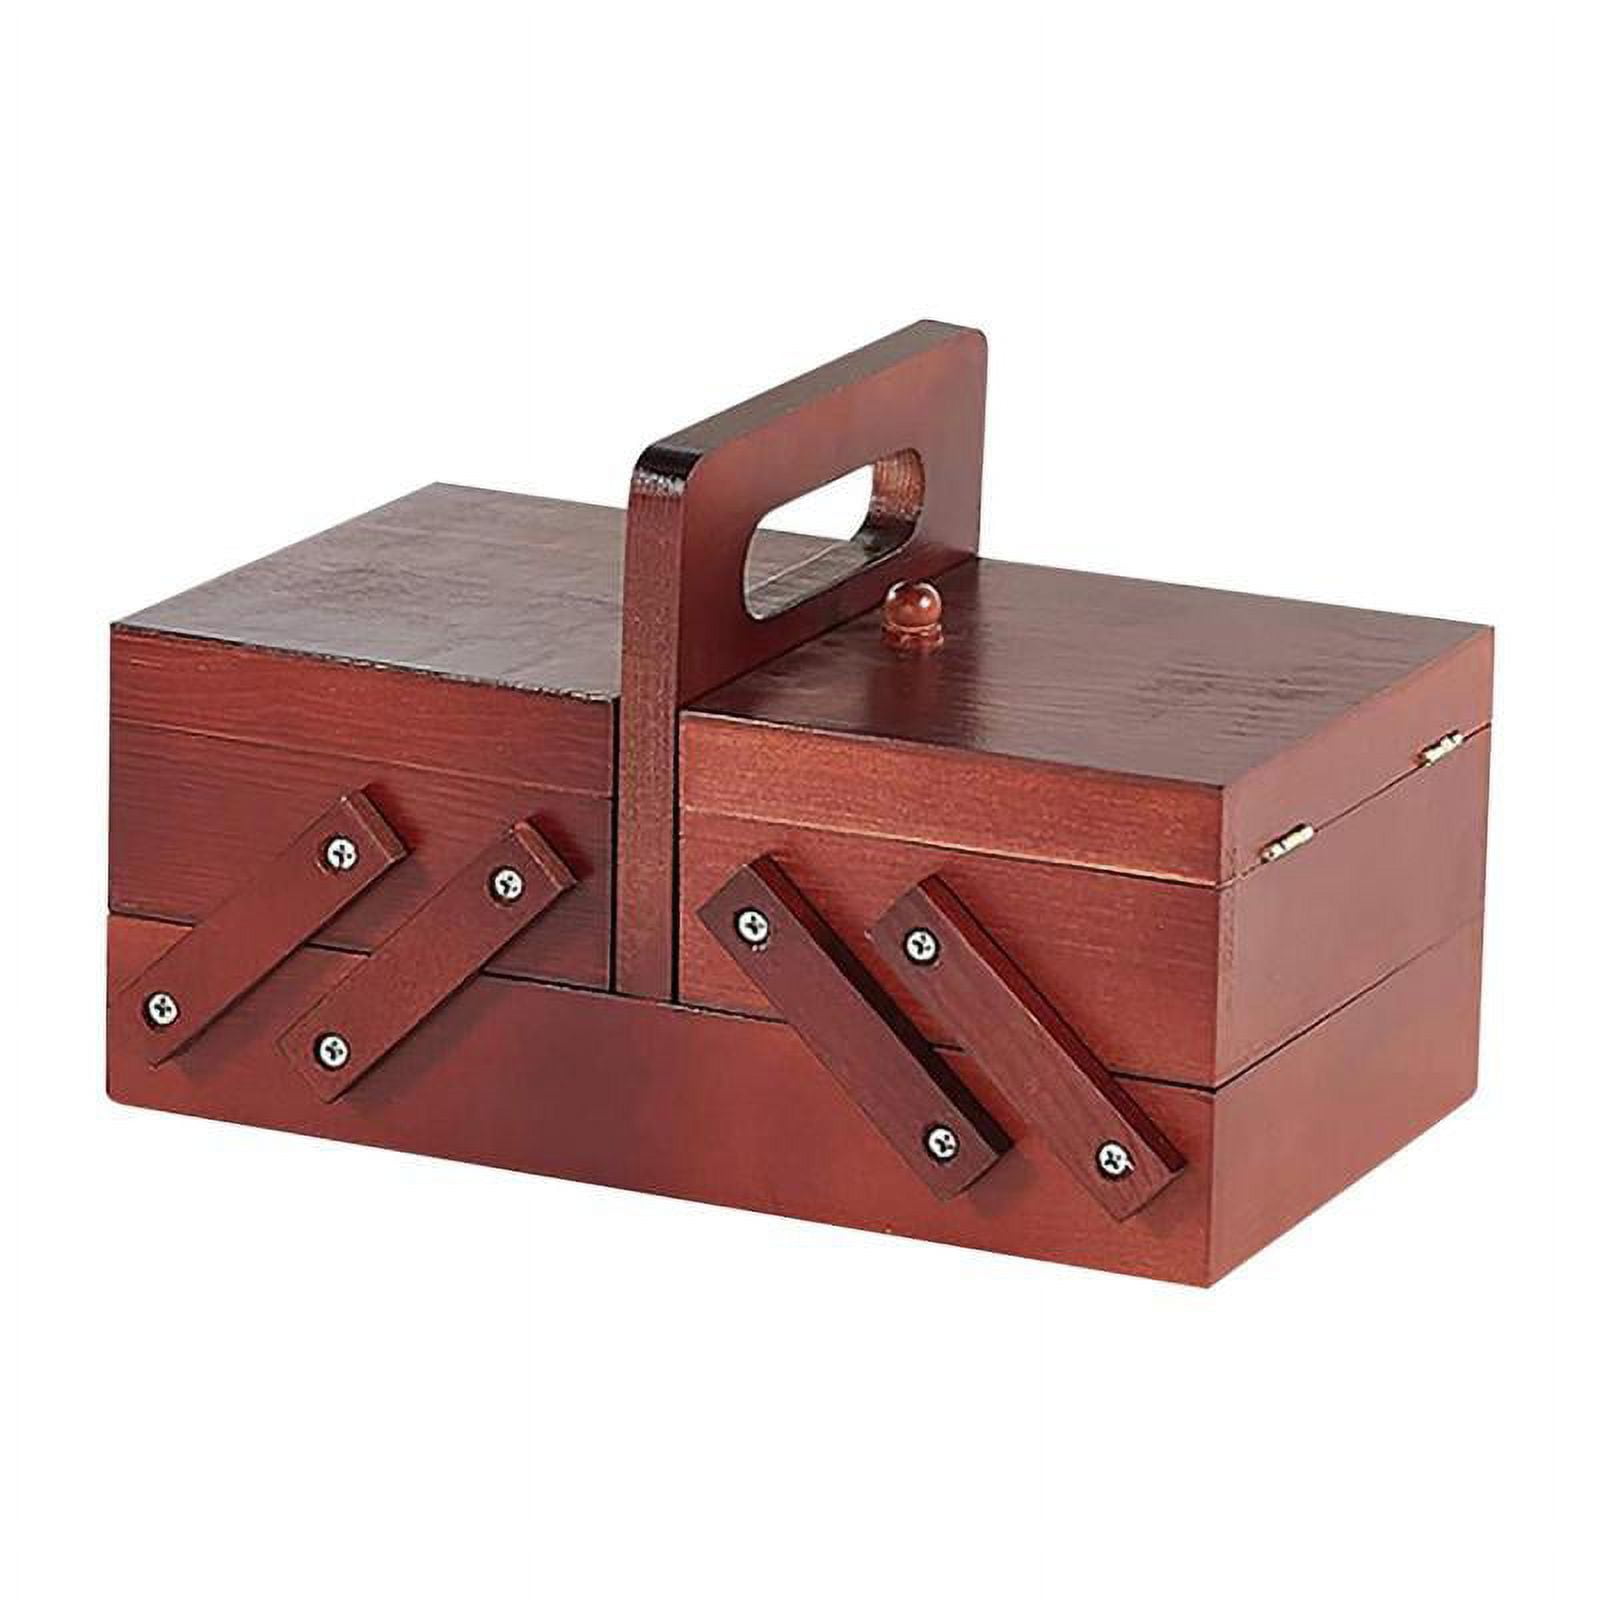 Wooden Sewing Box for Adults Beginners Sewing Kits Accessories